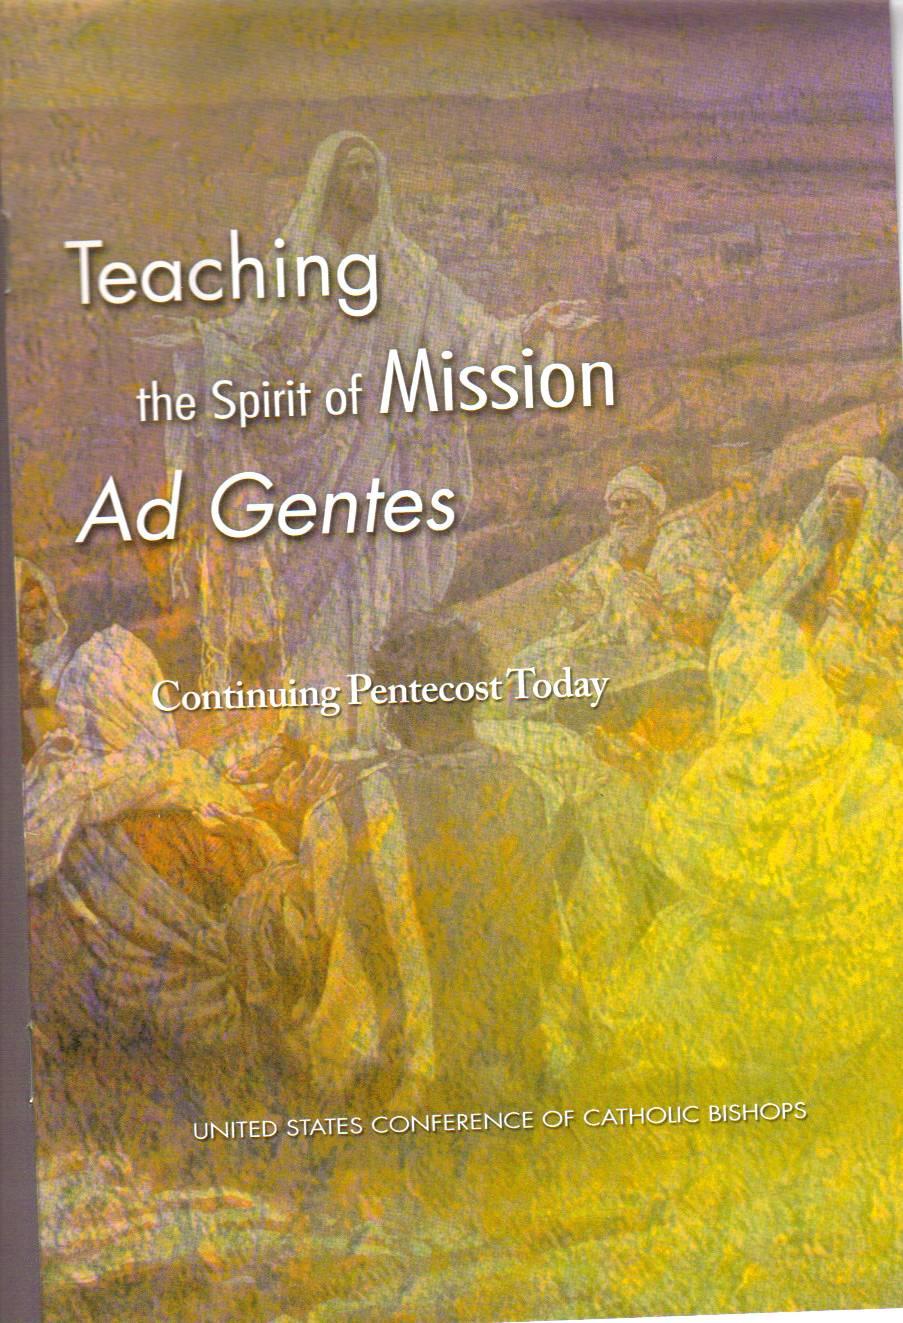 6 The United States Bishops have recently published the document, "Teaching the Spirit of Mission Ad Gentes: Continuing Pentecost Today.